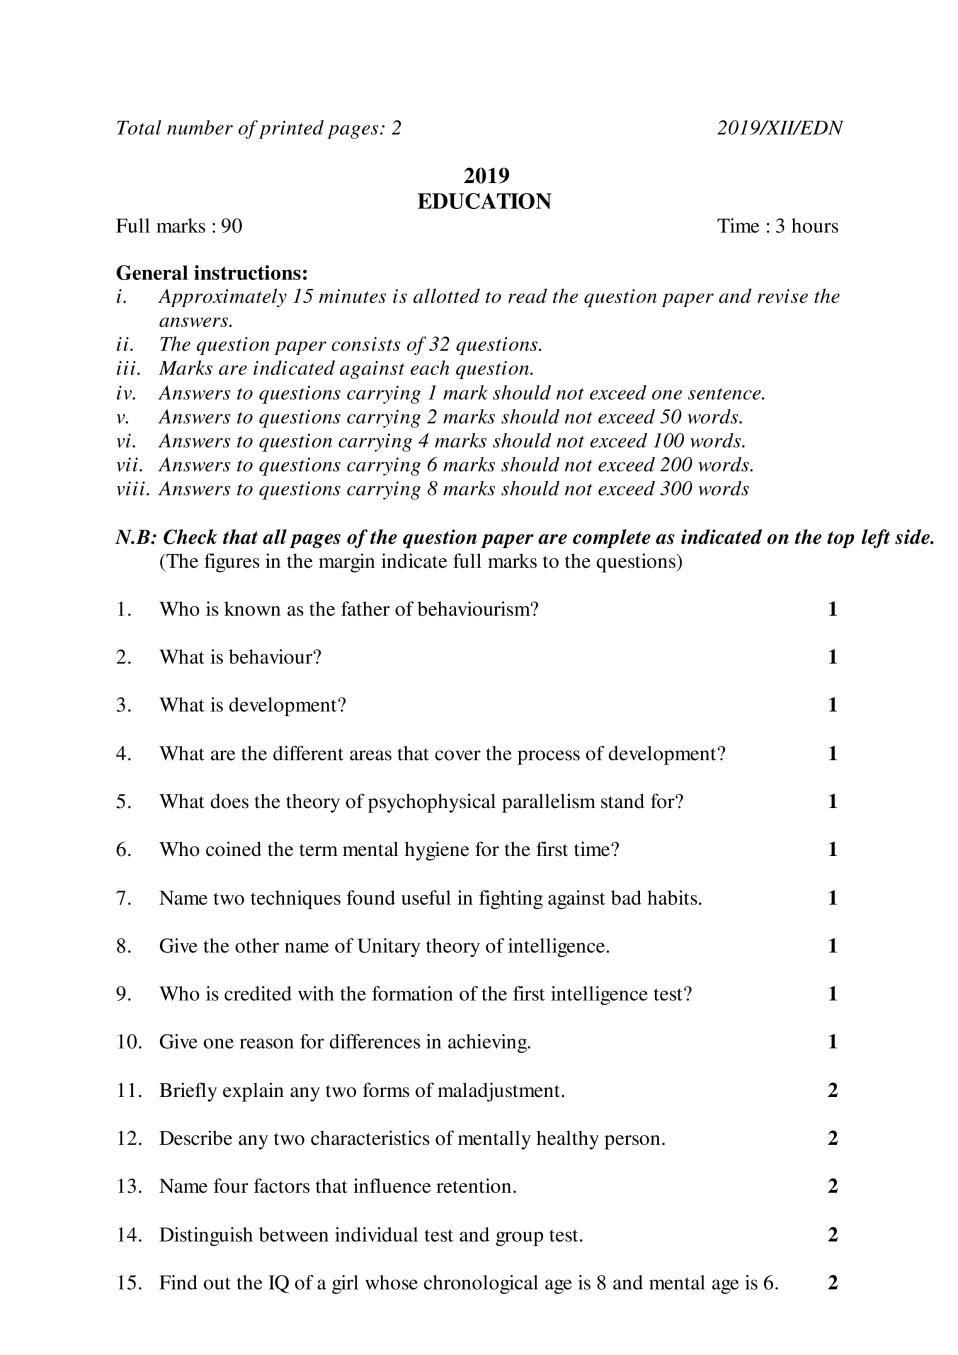 NBSE Class 12 Question Paper 2019 for Education - Page 1